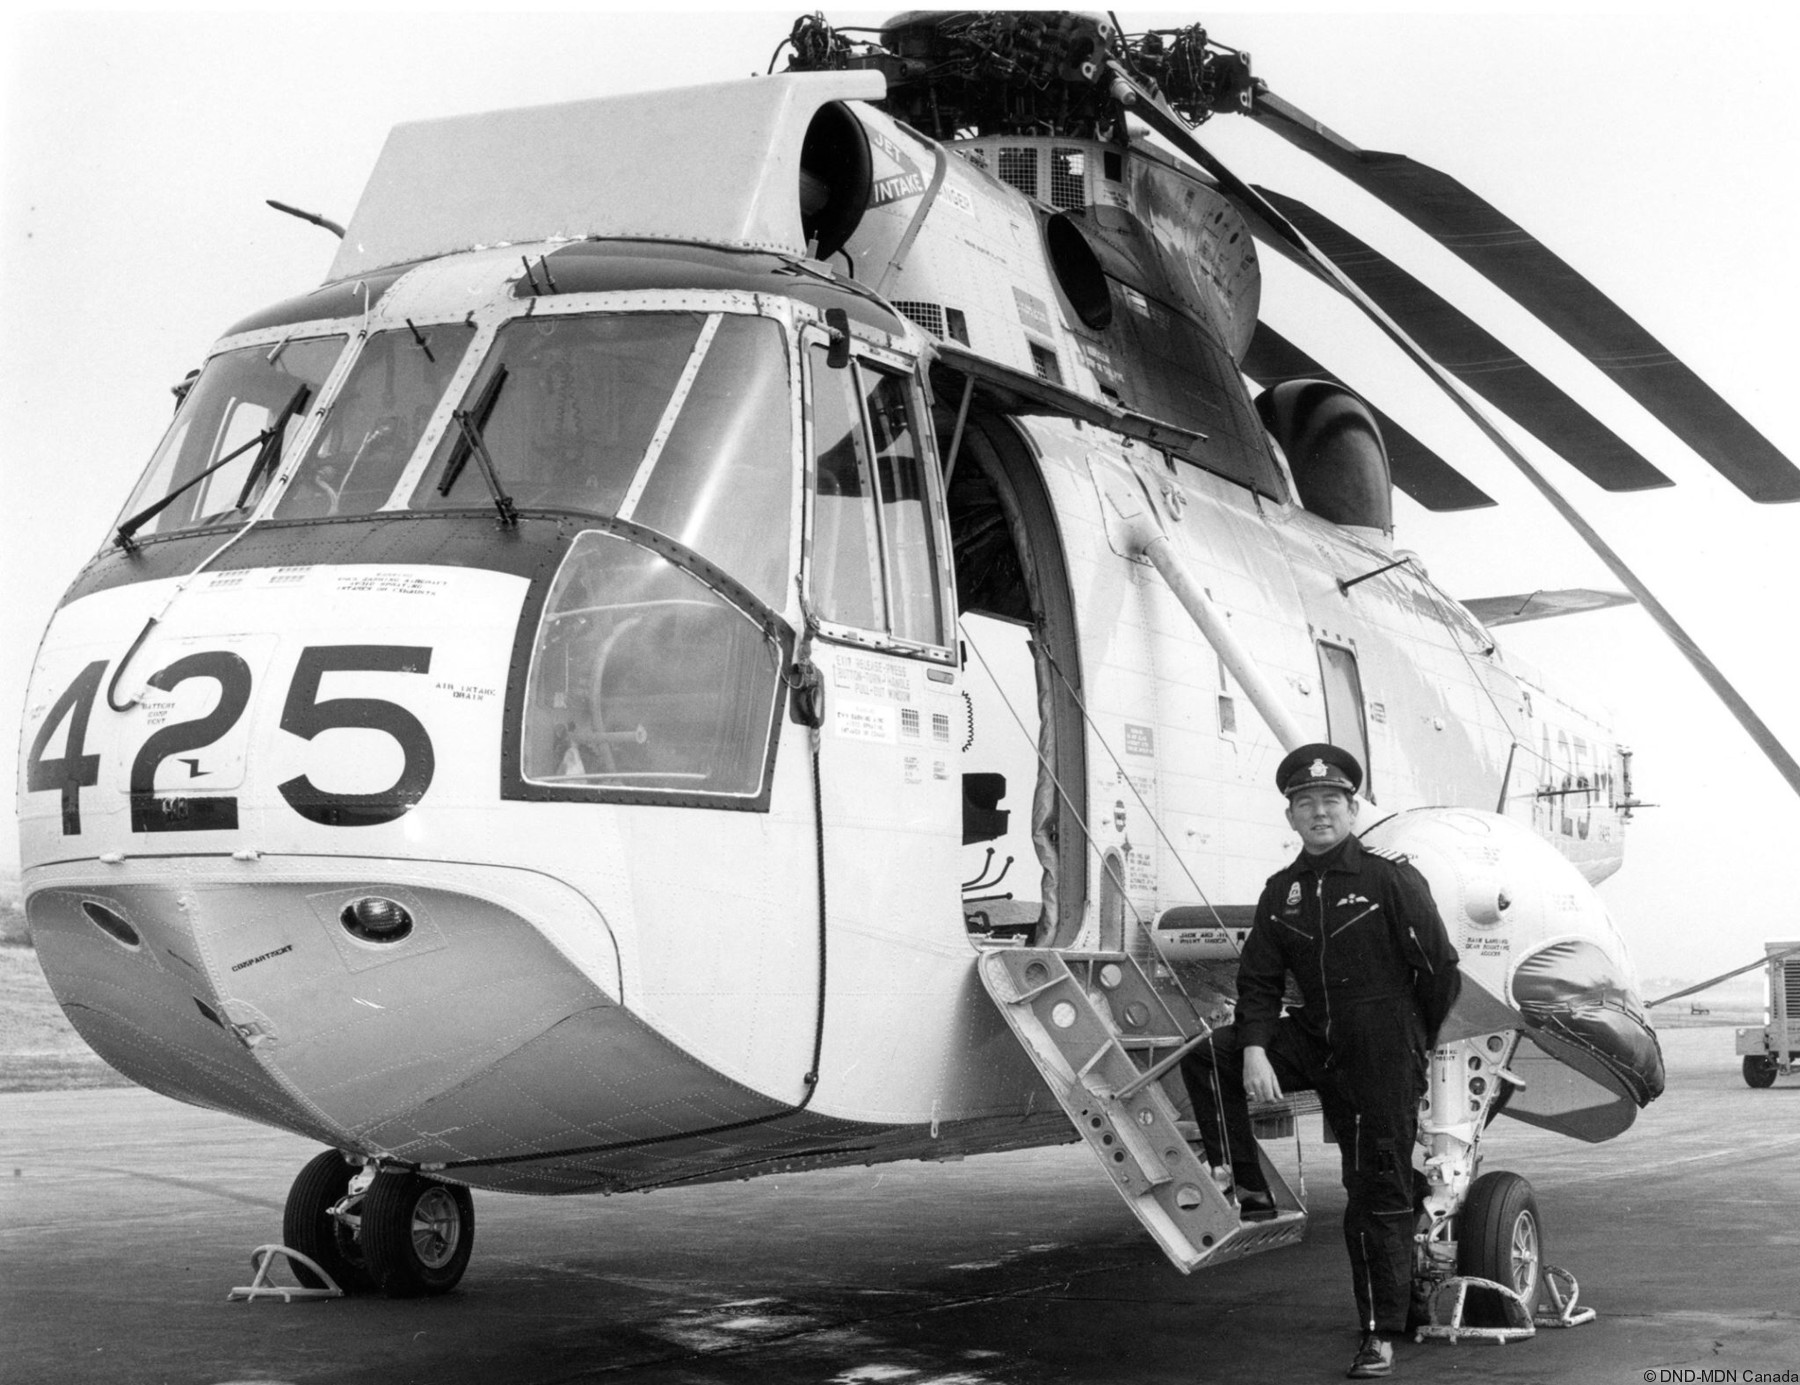 ch-124 sea king royal canadian navy sikorsky naval helicopter rcaf hmcs squadron 45